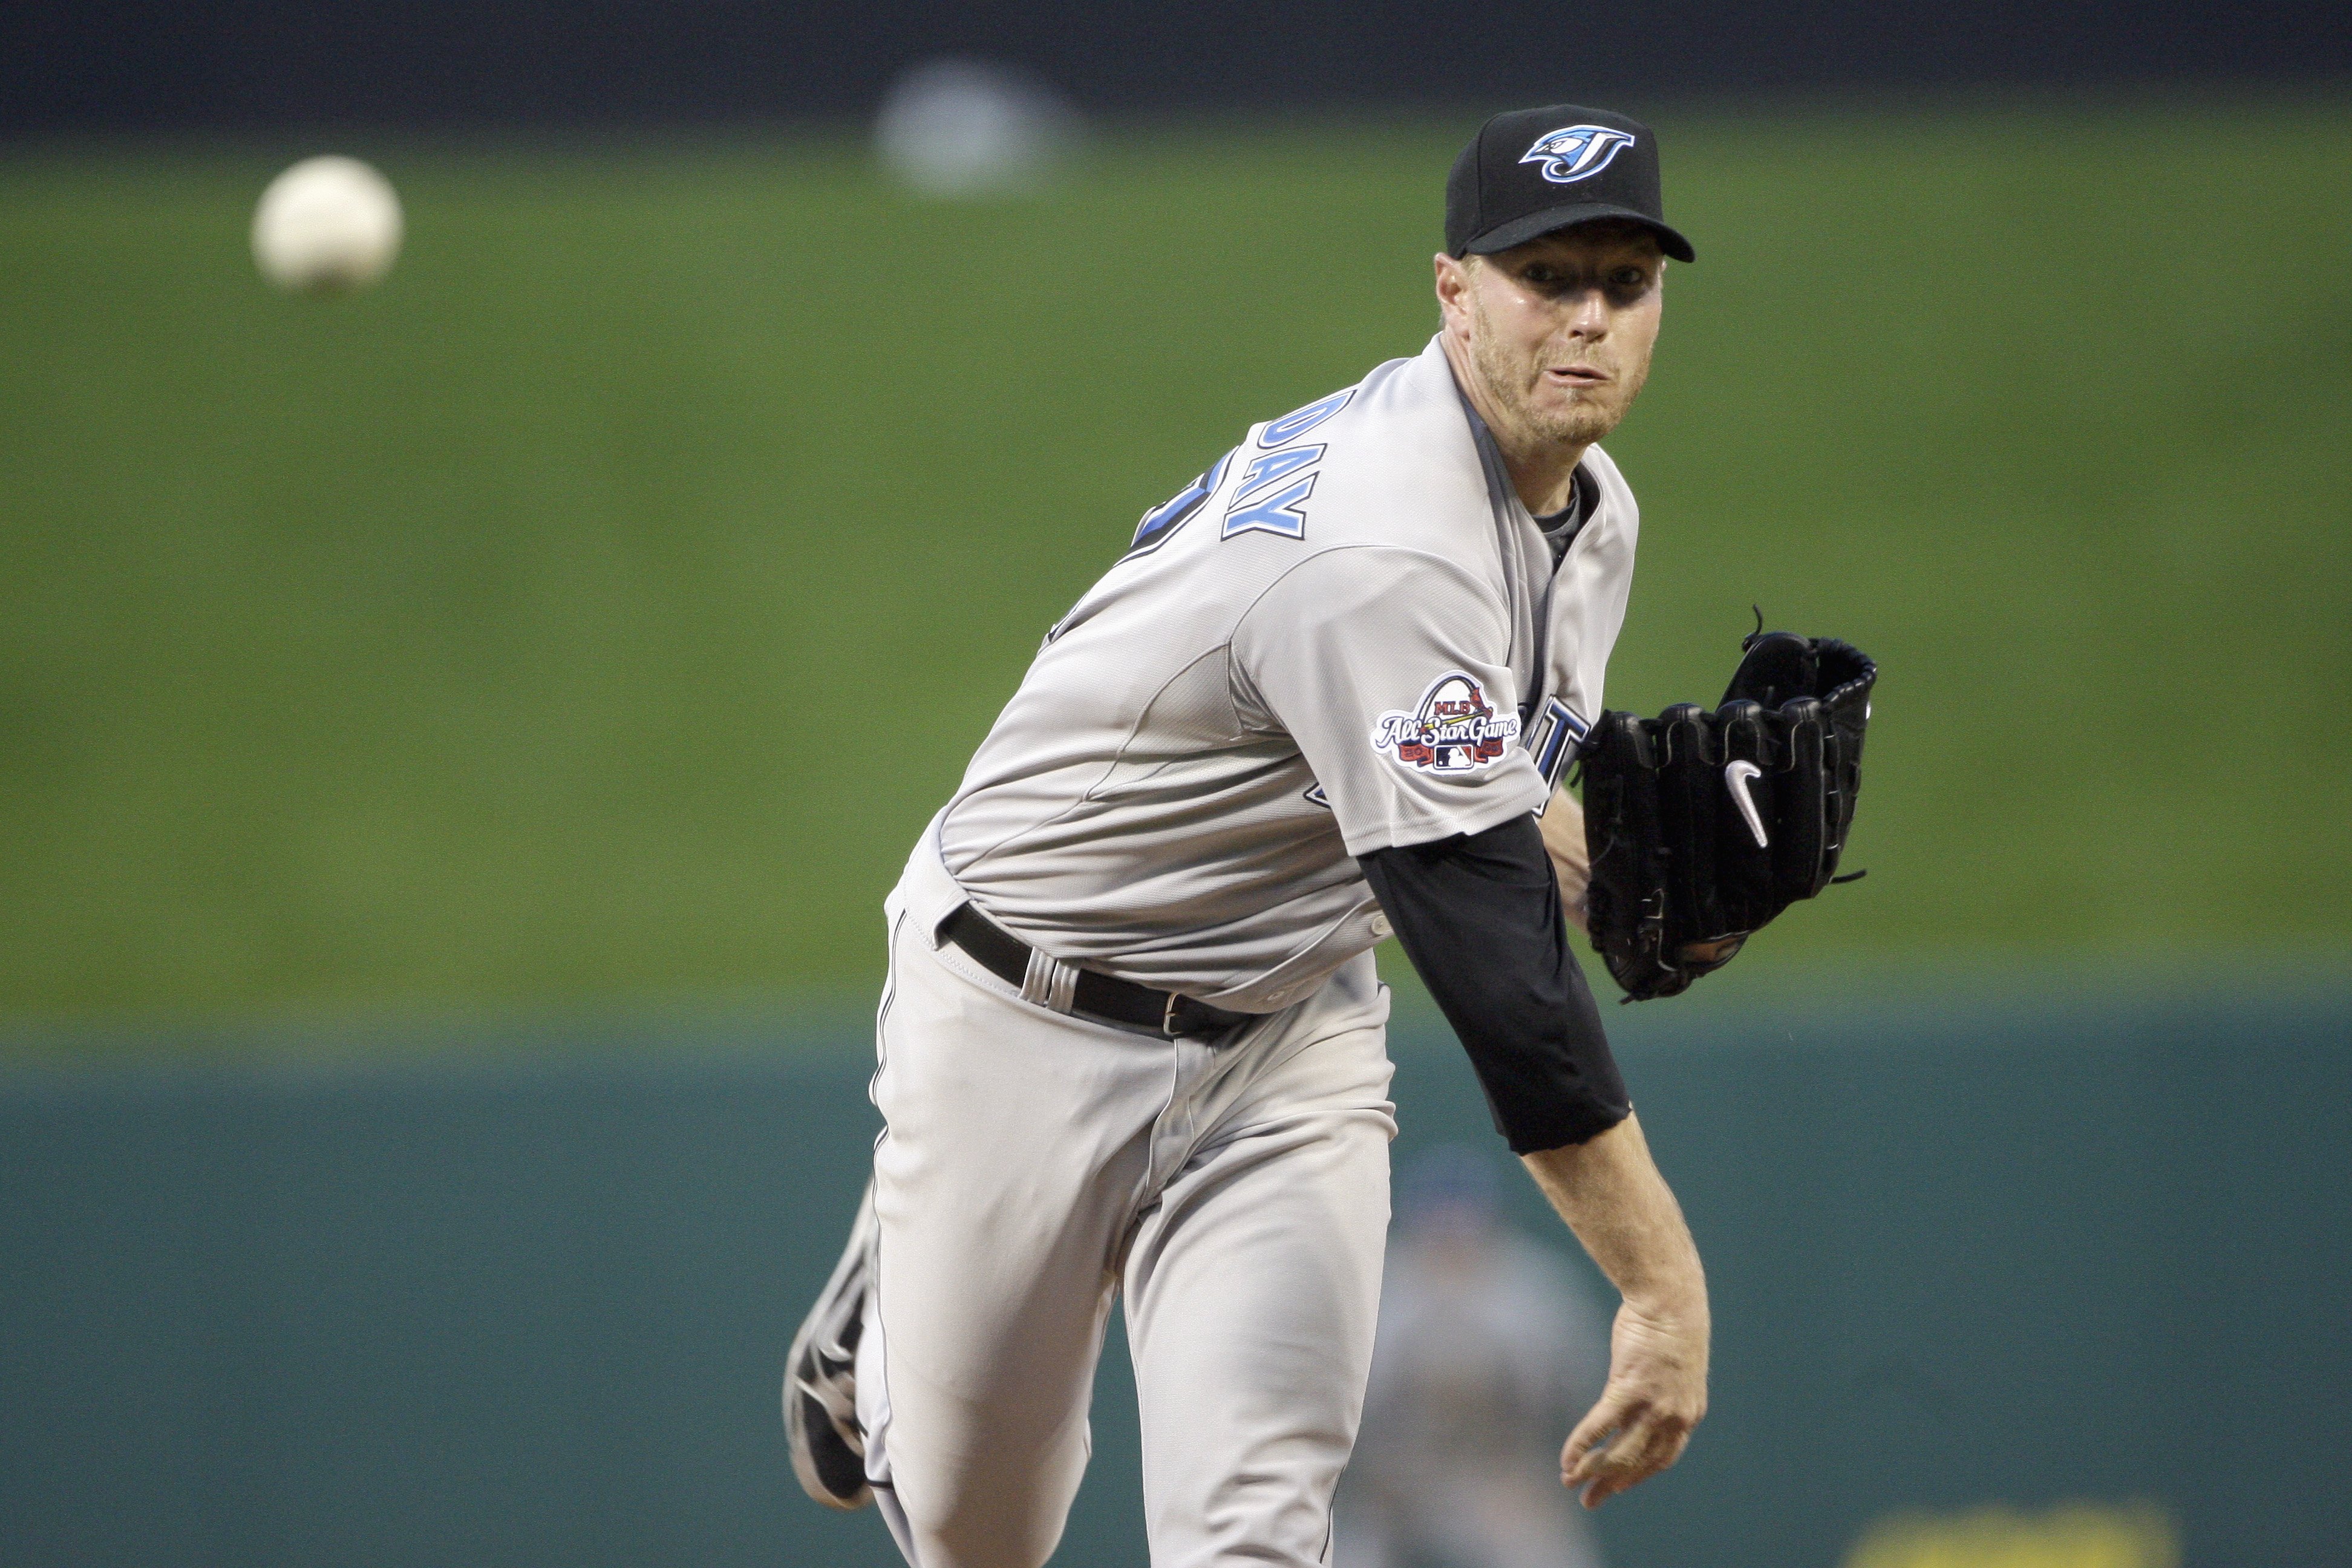 ST. LOUIS, MO - JULY 14: American League All-Star Roy Halladay of the Toronto Blue Jays pitches during the 2009 MLB All-Star Game at Busch Stadium on July 14, 2009 in St Louis, Missouri. (Photo by Pool/Getty Images)